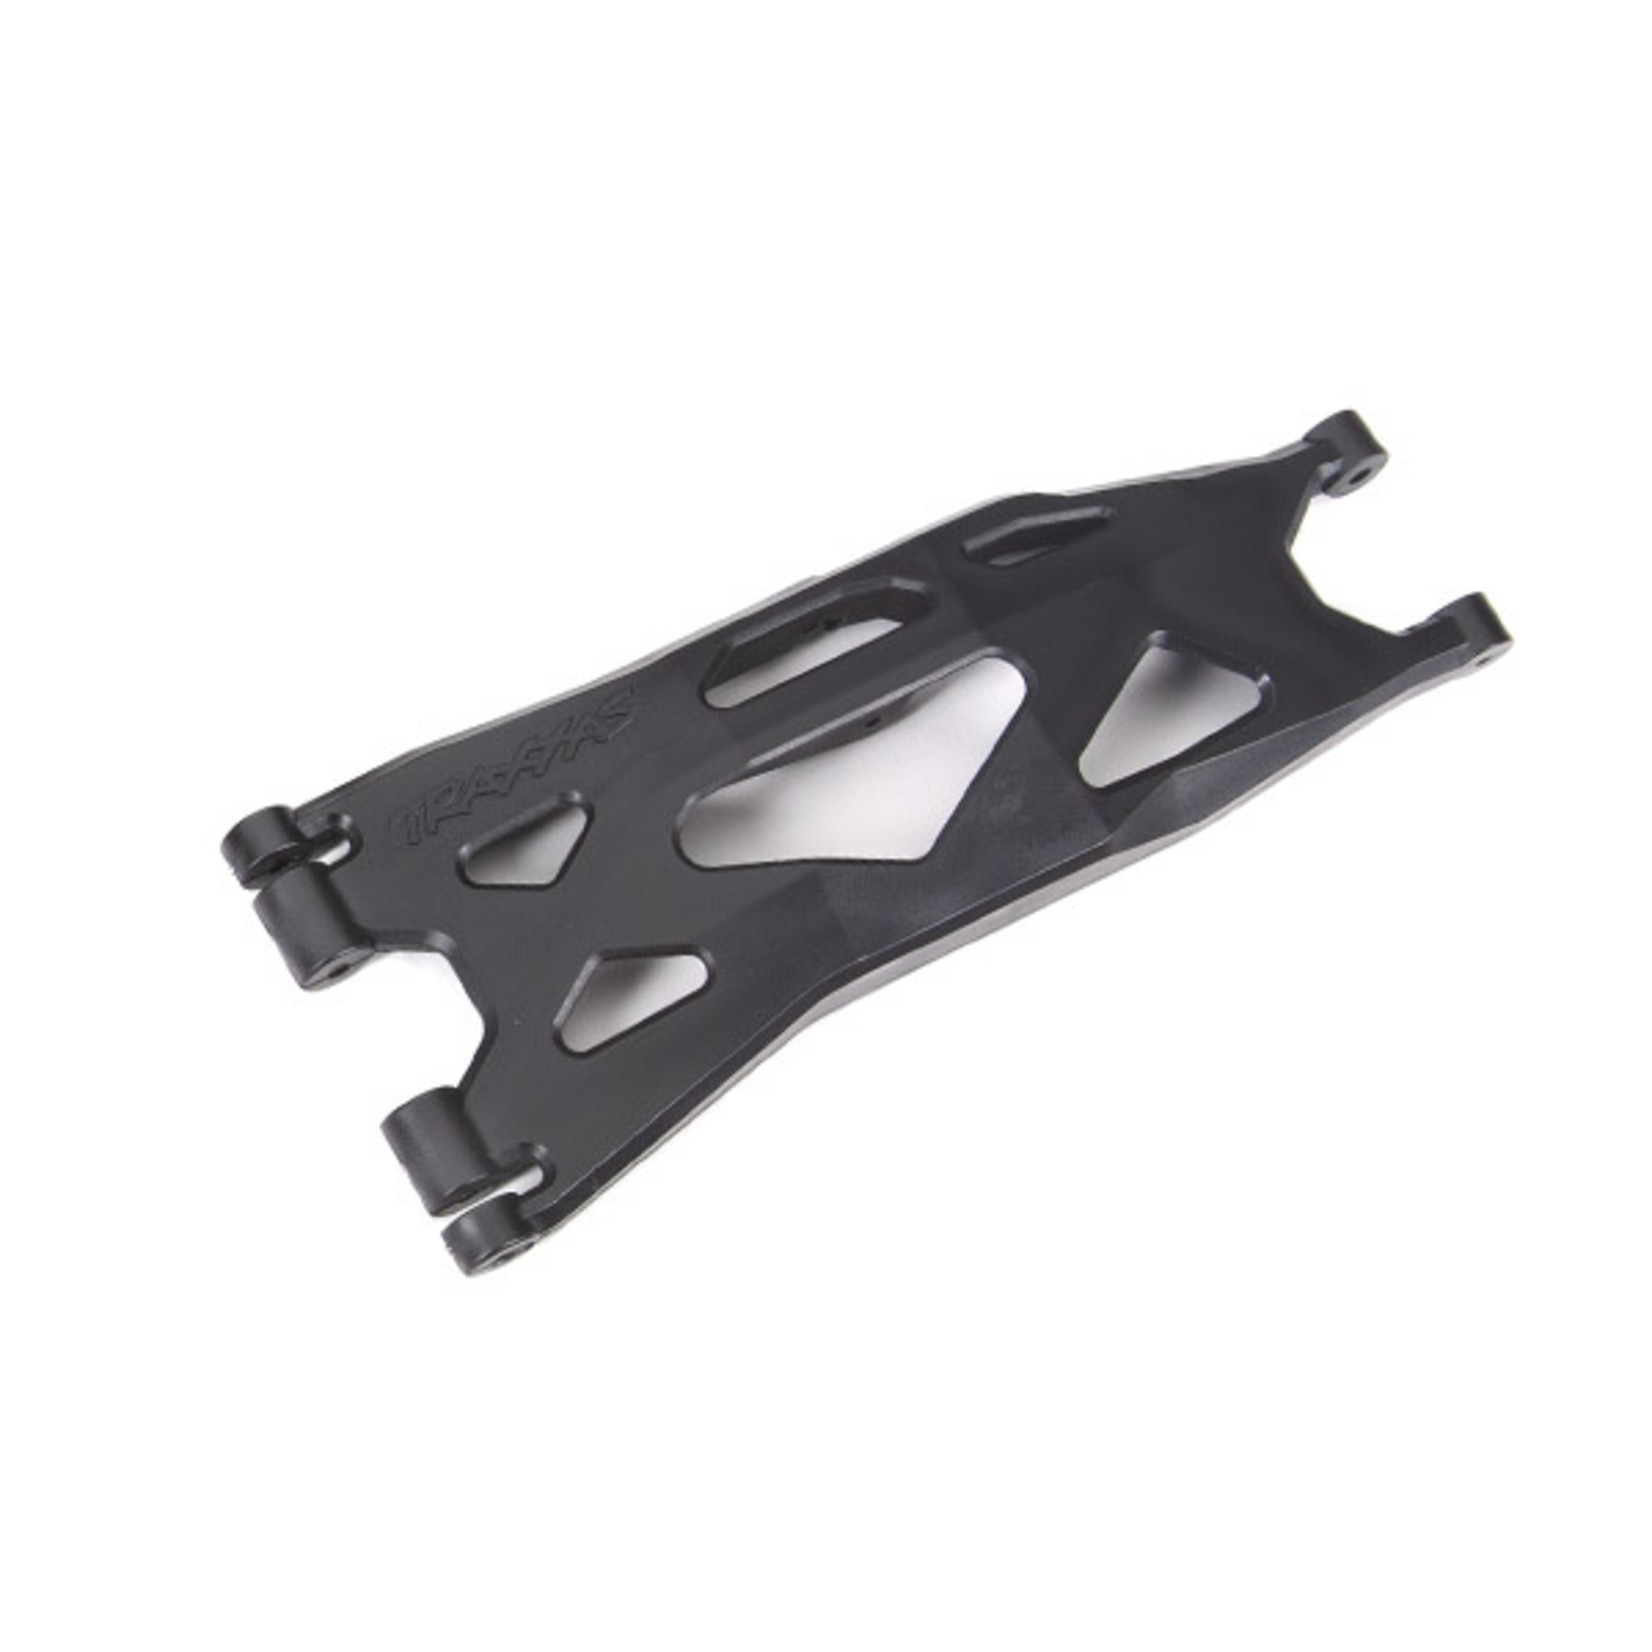 Traxxas 7894 - Suspension arm, lower, black (1) (left, fro